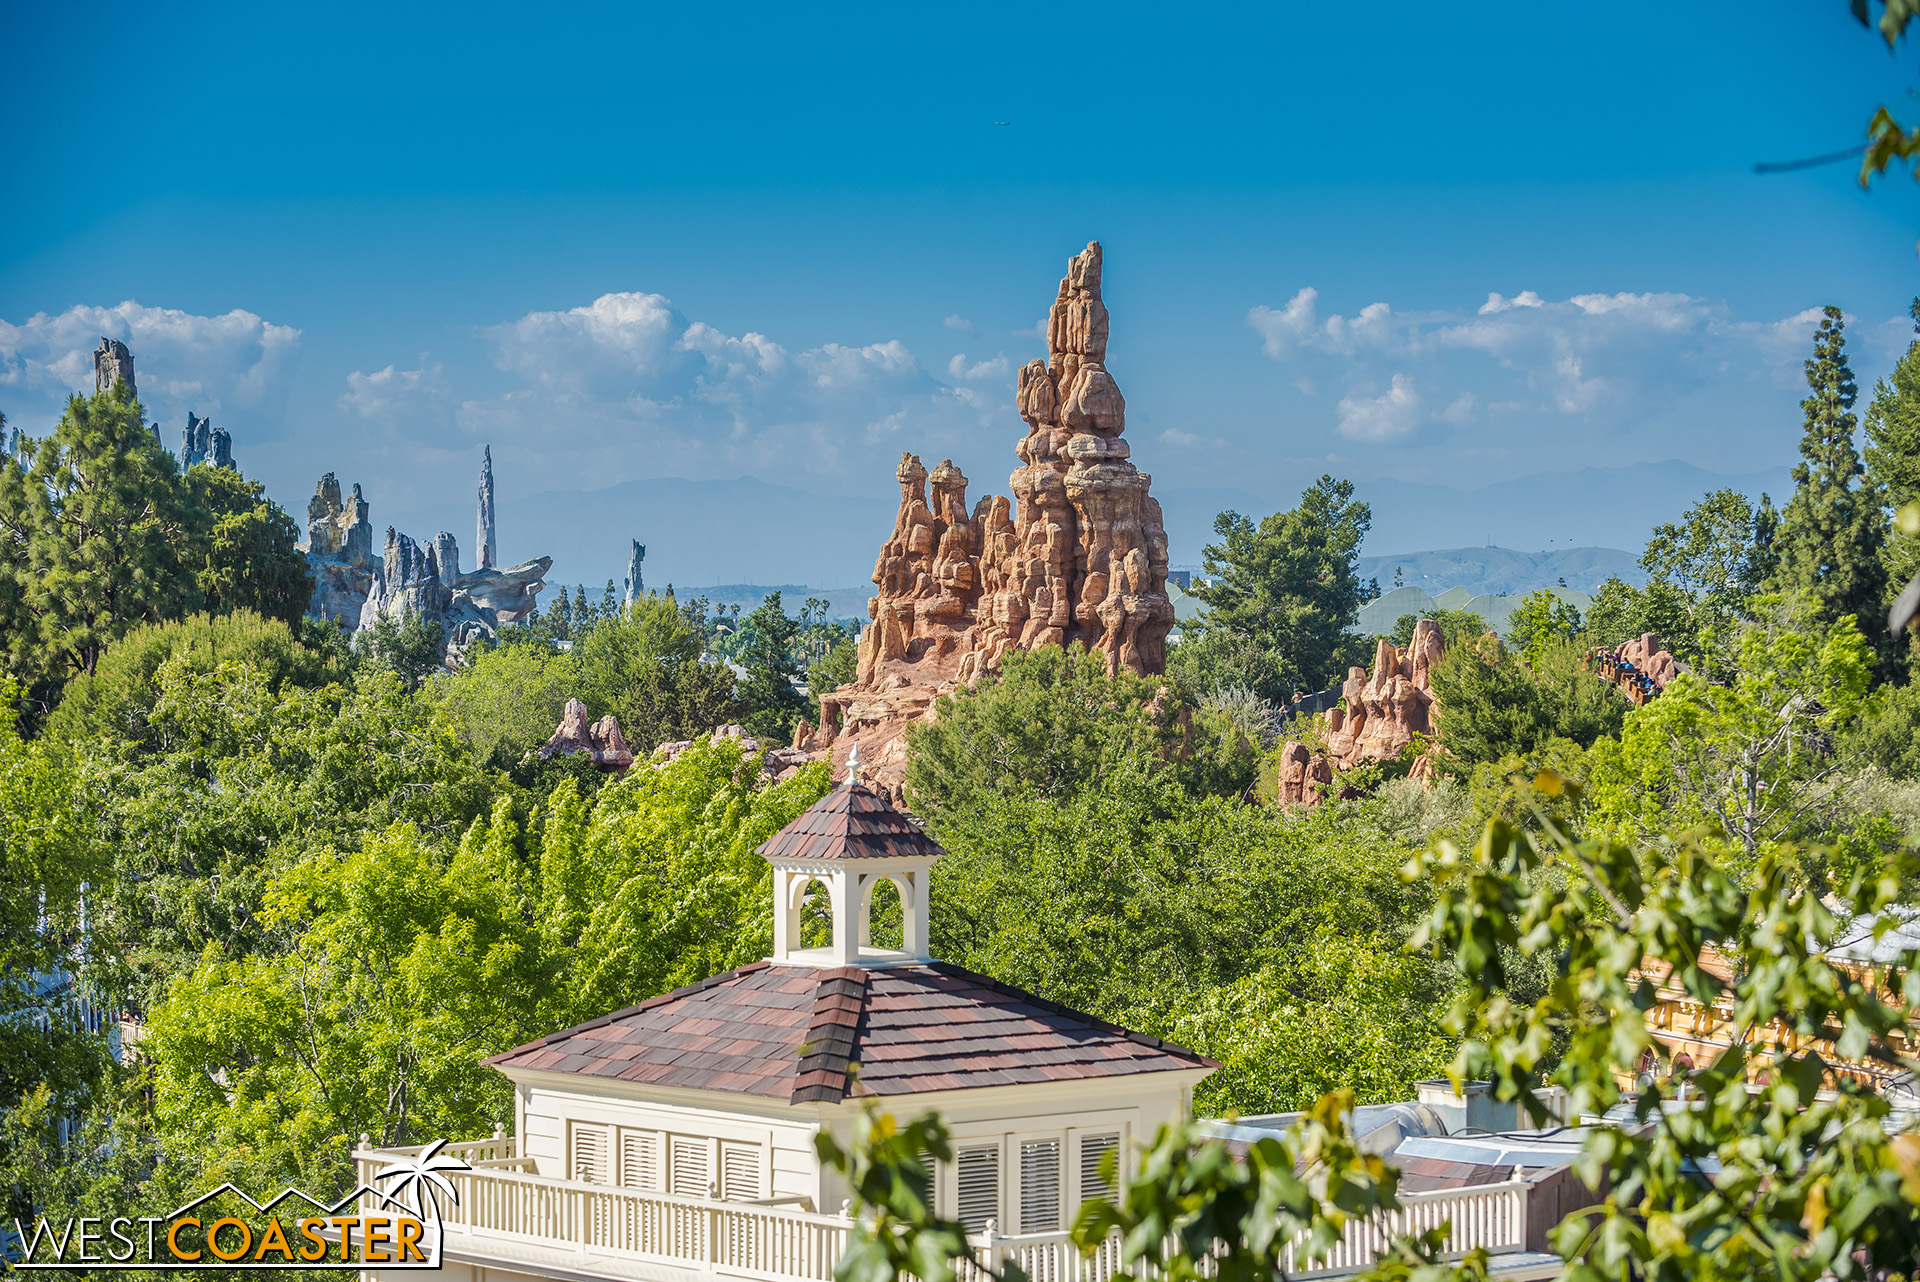  The view from Tarzan’s Treehouse is pretty great too! 